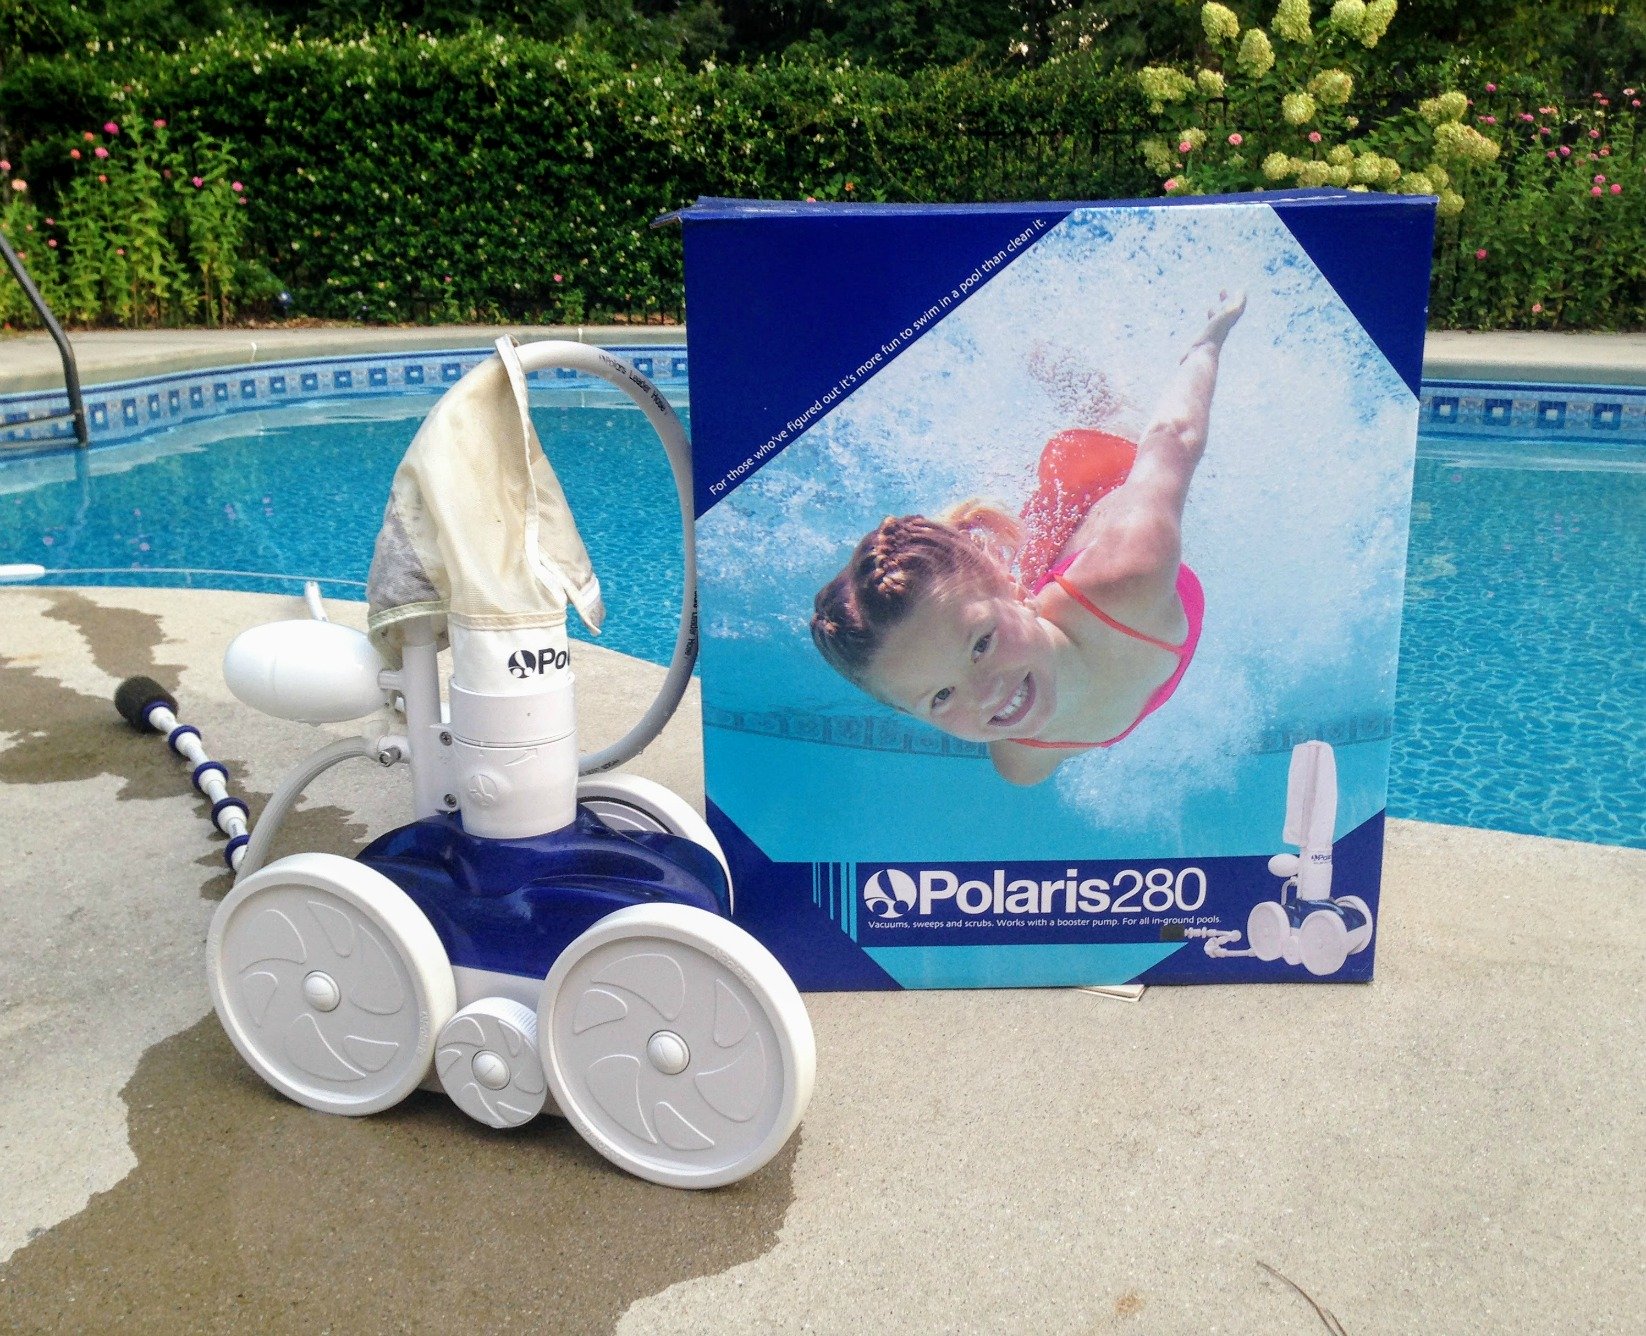 automatic inground pool cleaners